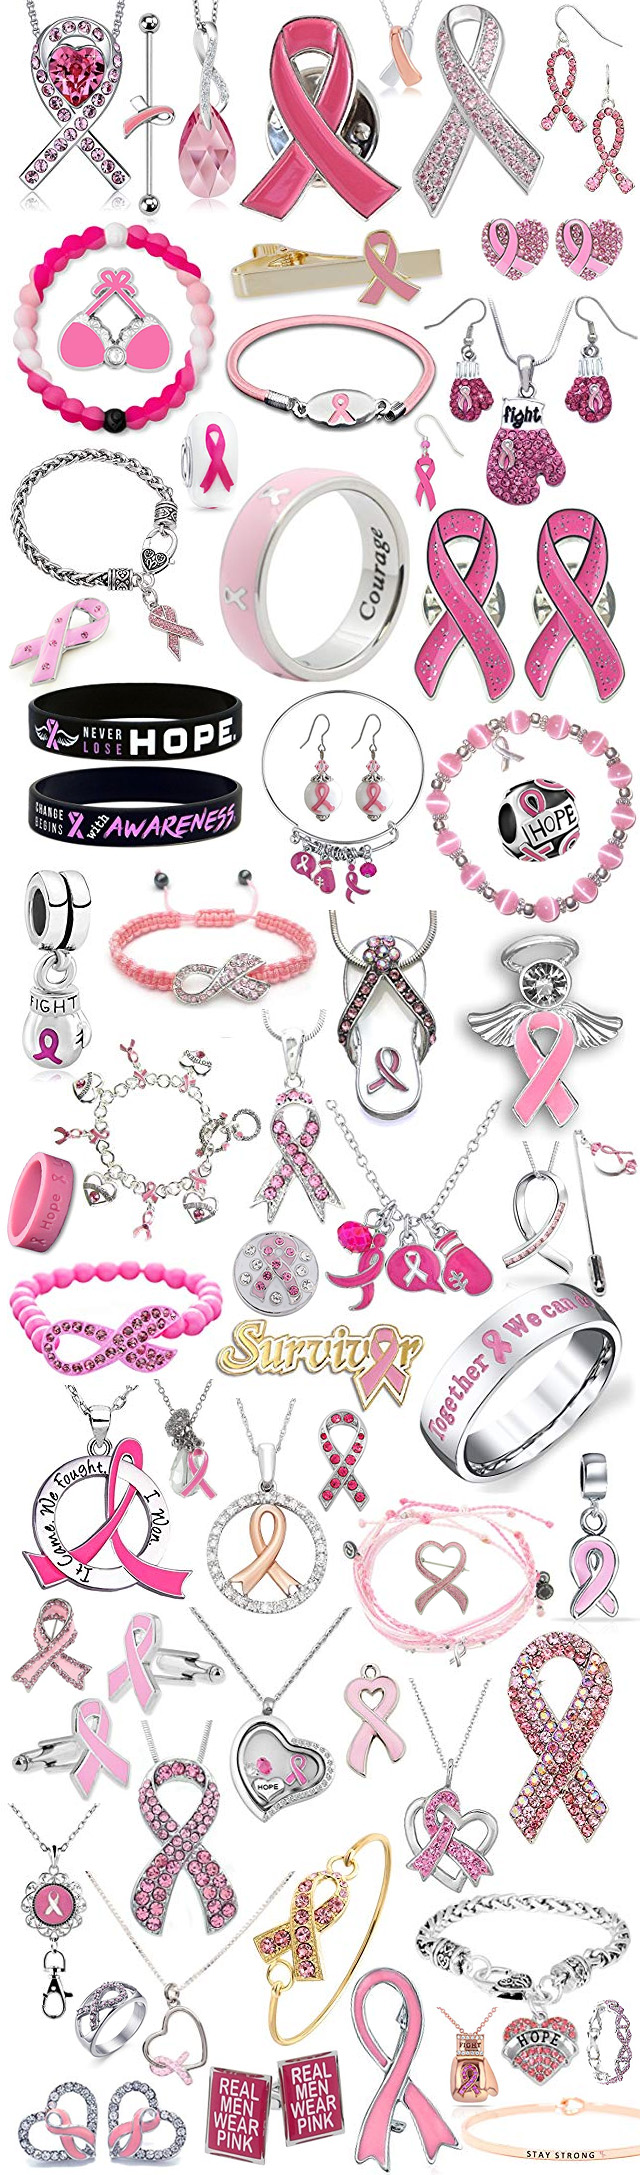 Pink Breast Cancer Awareness Jewelry